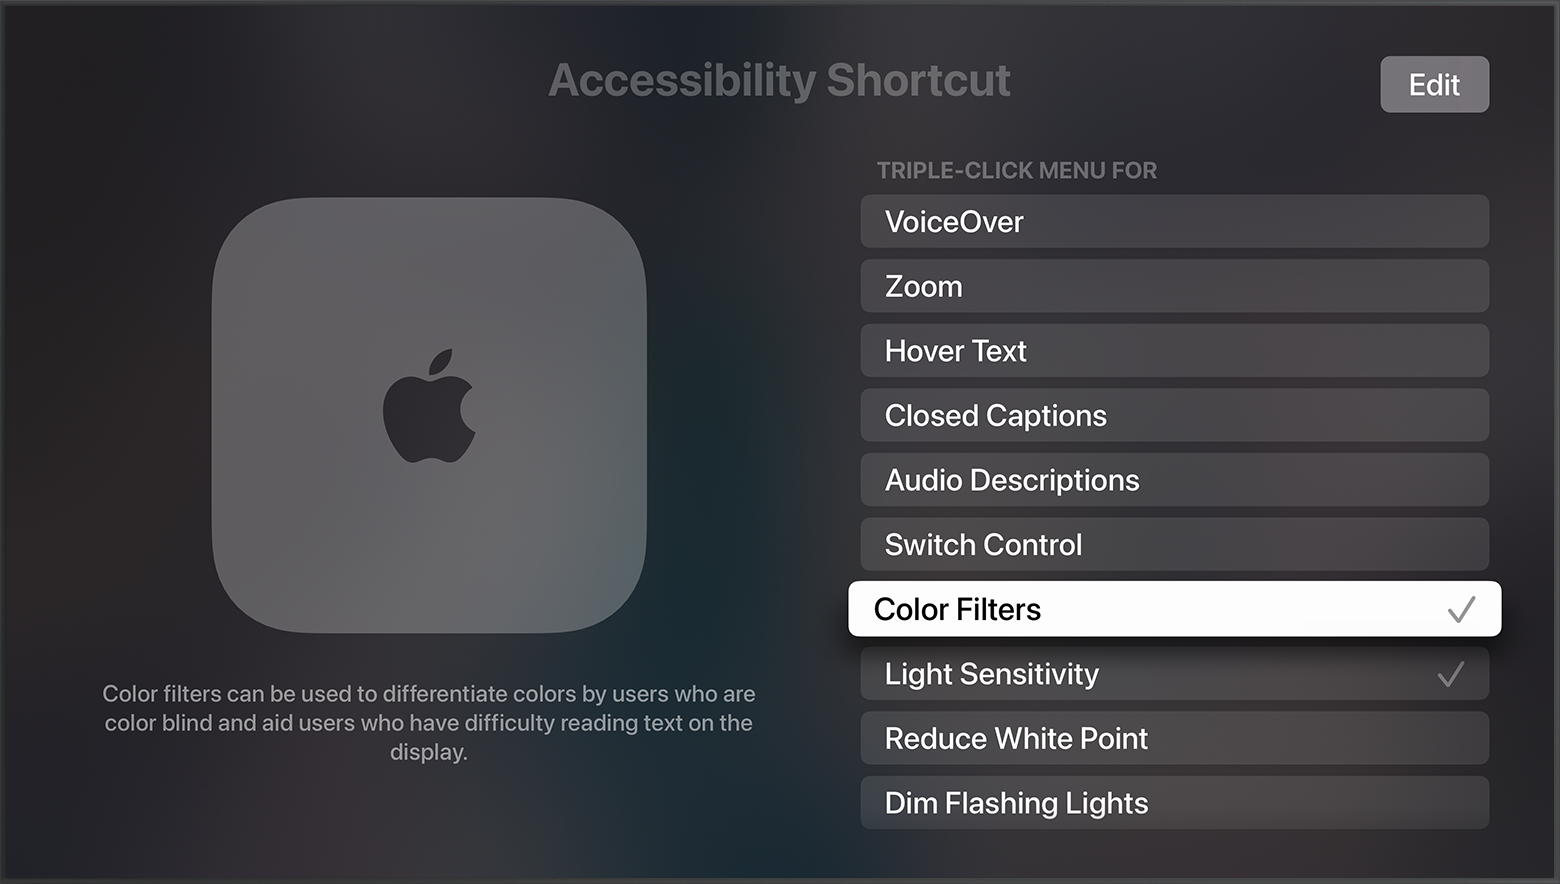 Colour Filters appears selected on the Accessibility Shortcut menu